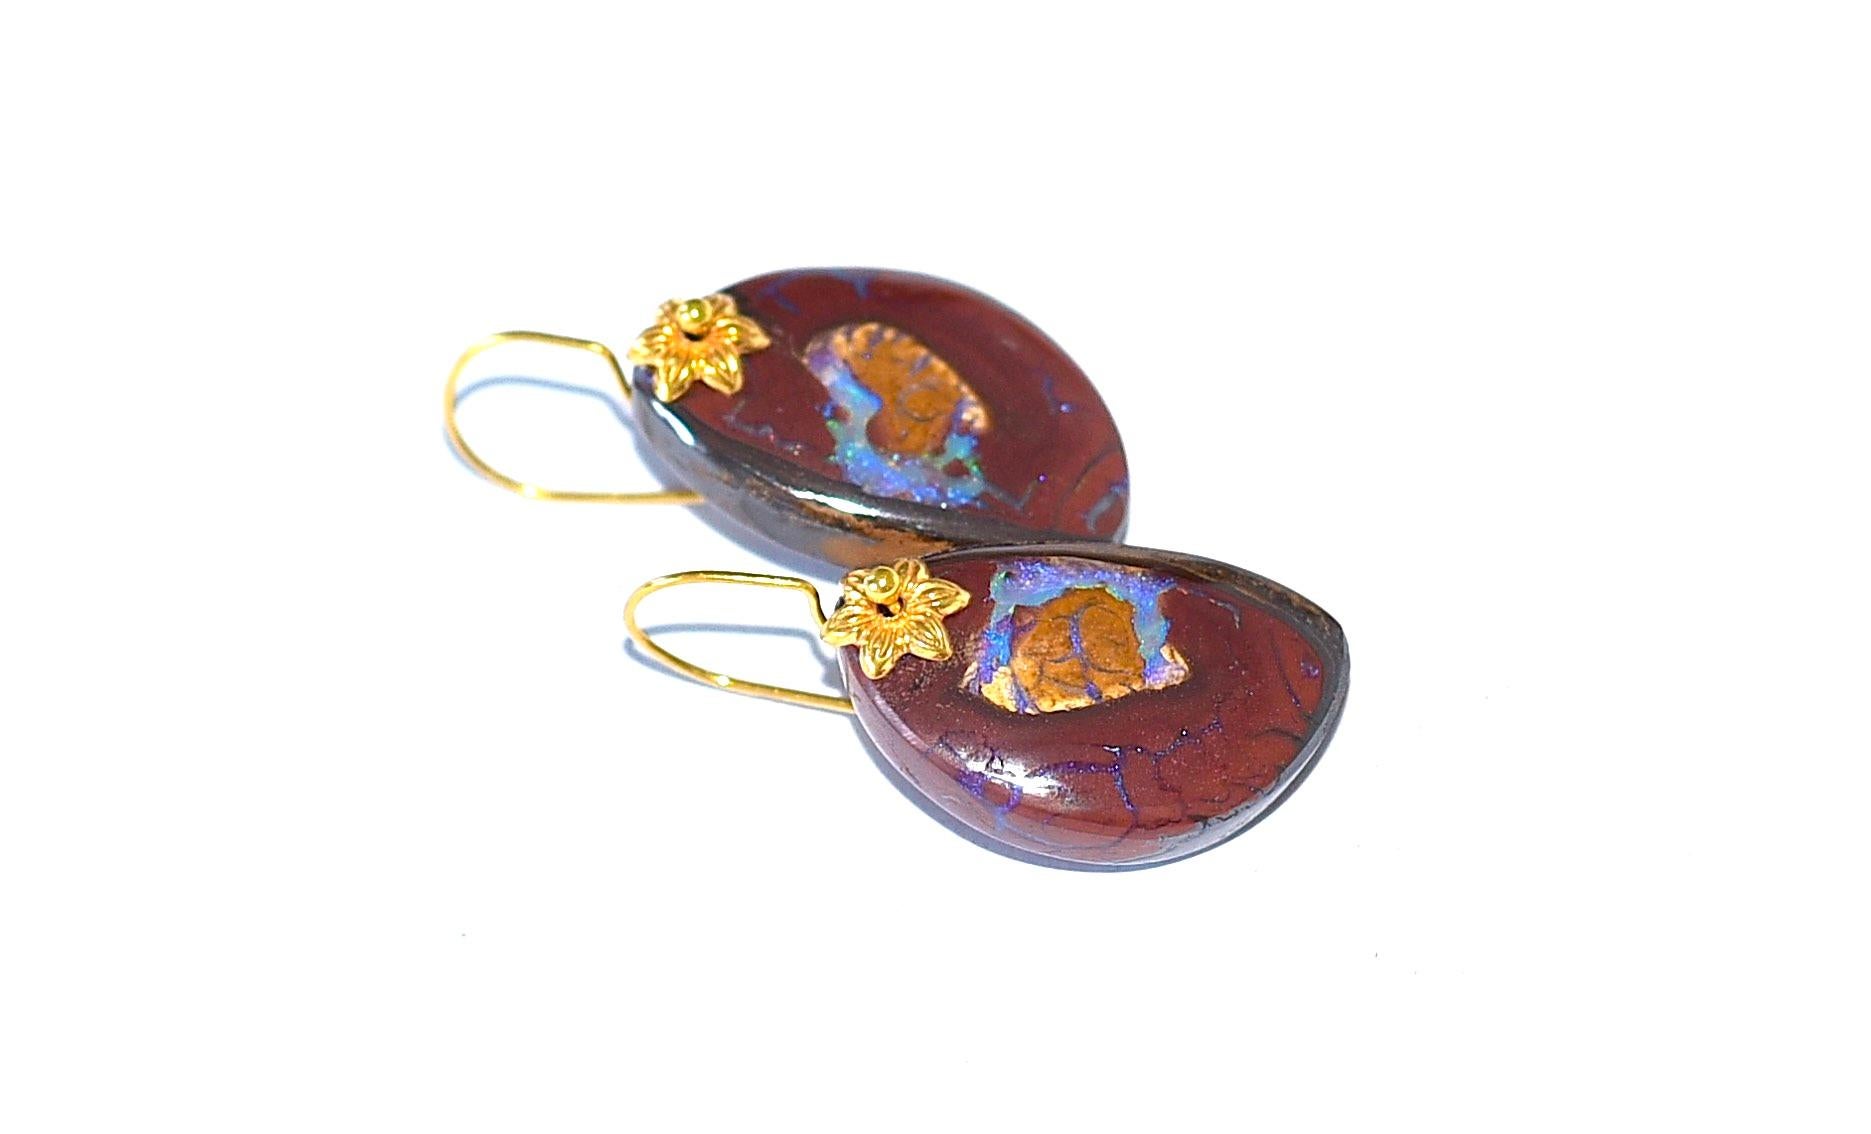 Very unique premium Australian Yowah Boulder Opal earrings! 
Australian Boulder Opal is found in the desert of Queensland. This region is very harsh, with temperatures that reach over 120 degrees. Opal mining is a very difficult process, and few